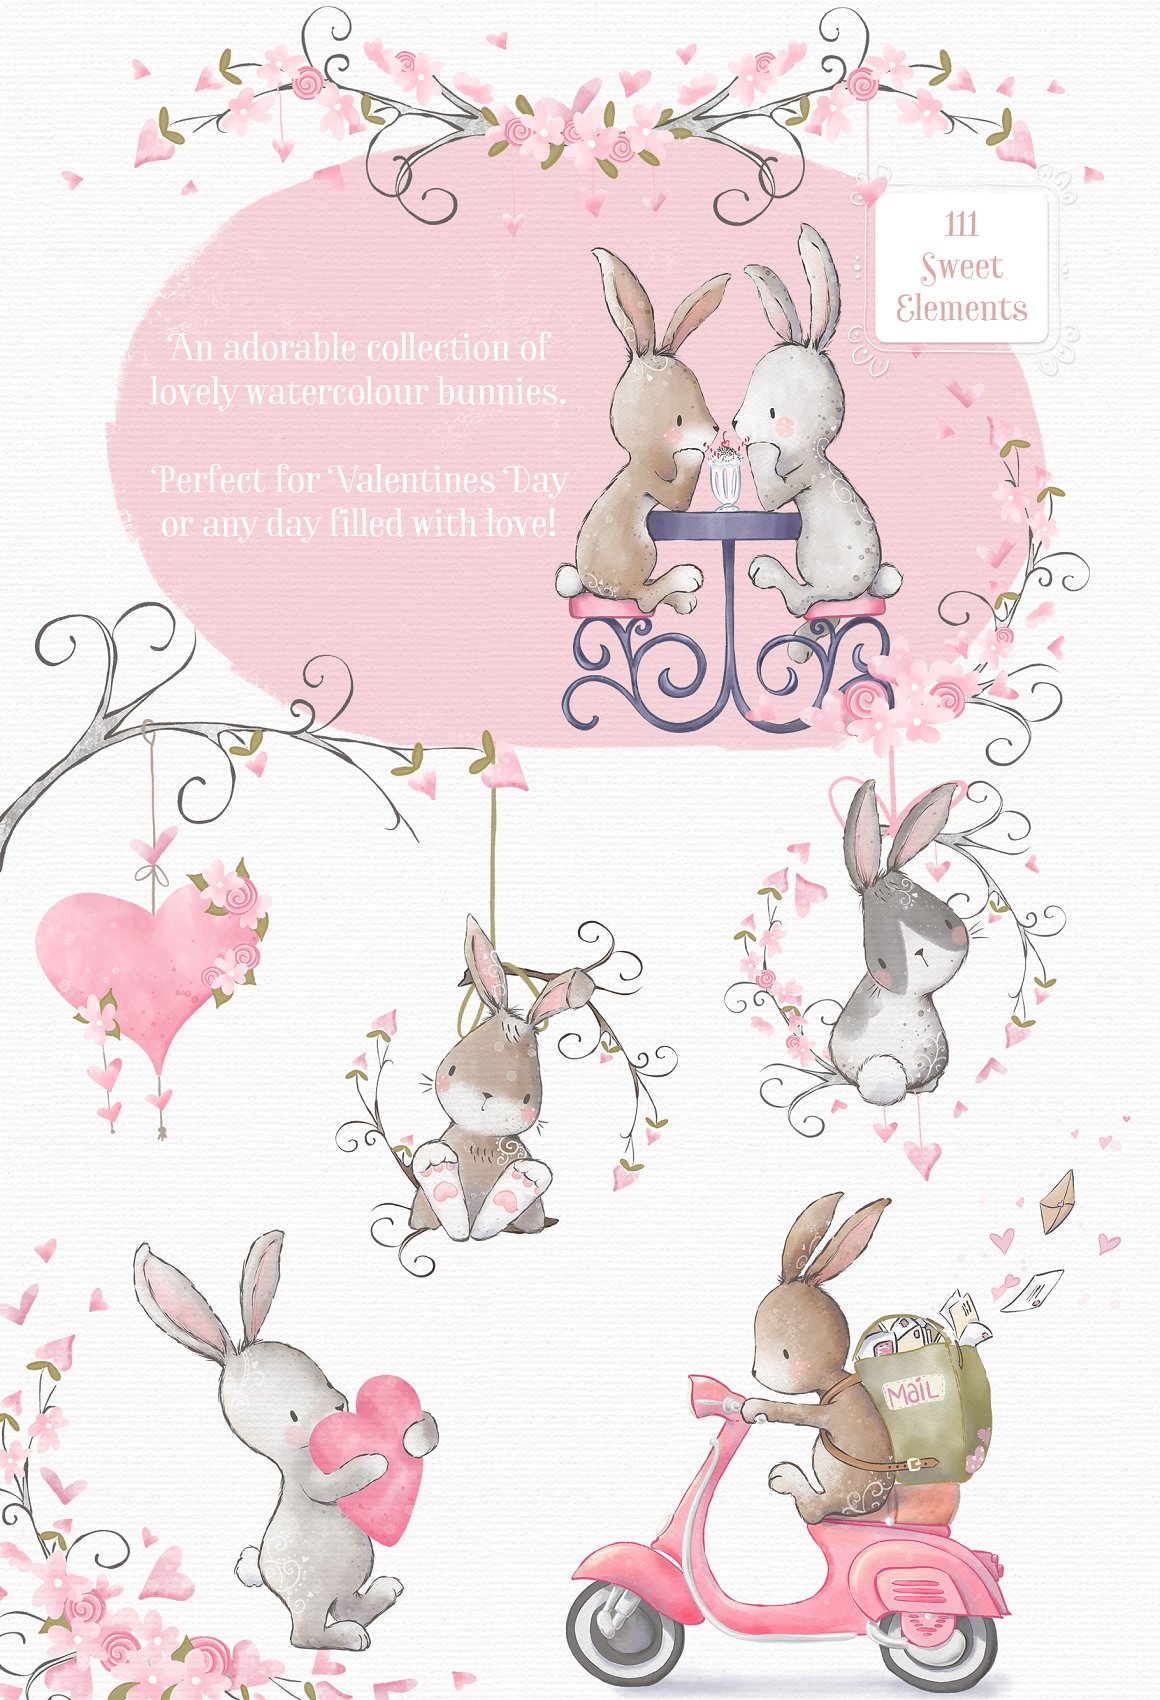 A set of 5 different illustrations of a bunny and sweet elements on a pink background.